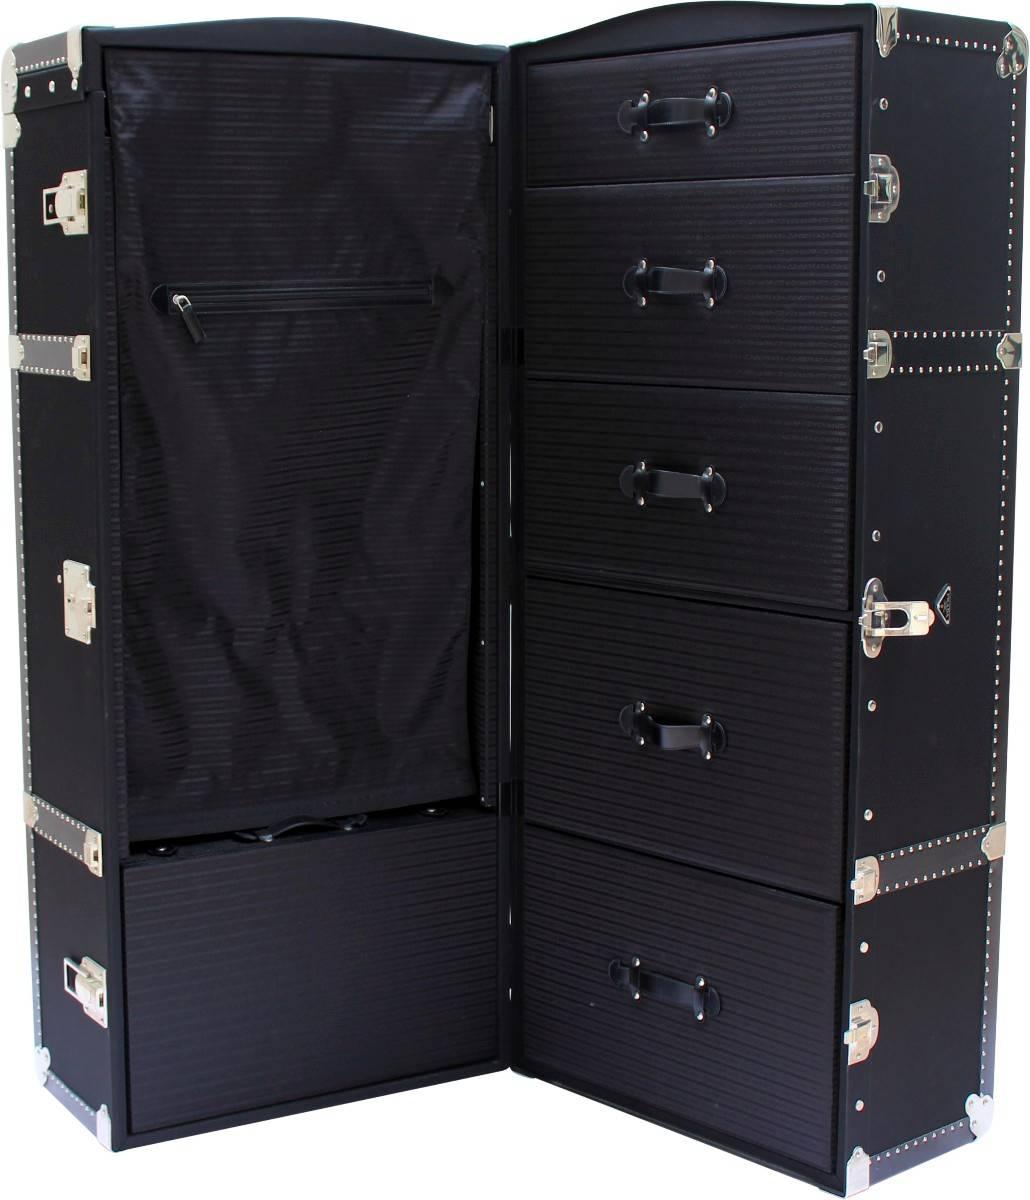 Stunning black canvas Prada wardrobe. Complete with hanging space and drawers to store all your precious items. Finished with palladium hardware this is a statement piece for your boudoir or walk in wardrobe.